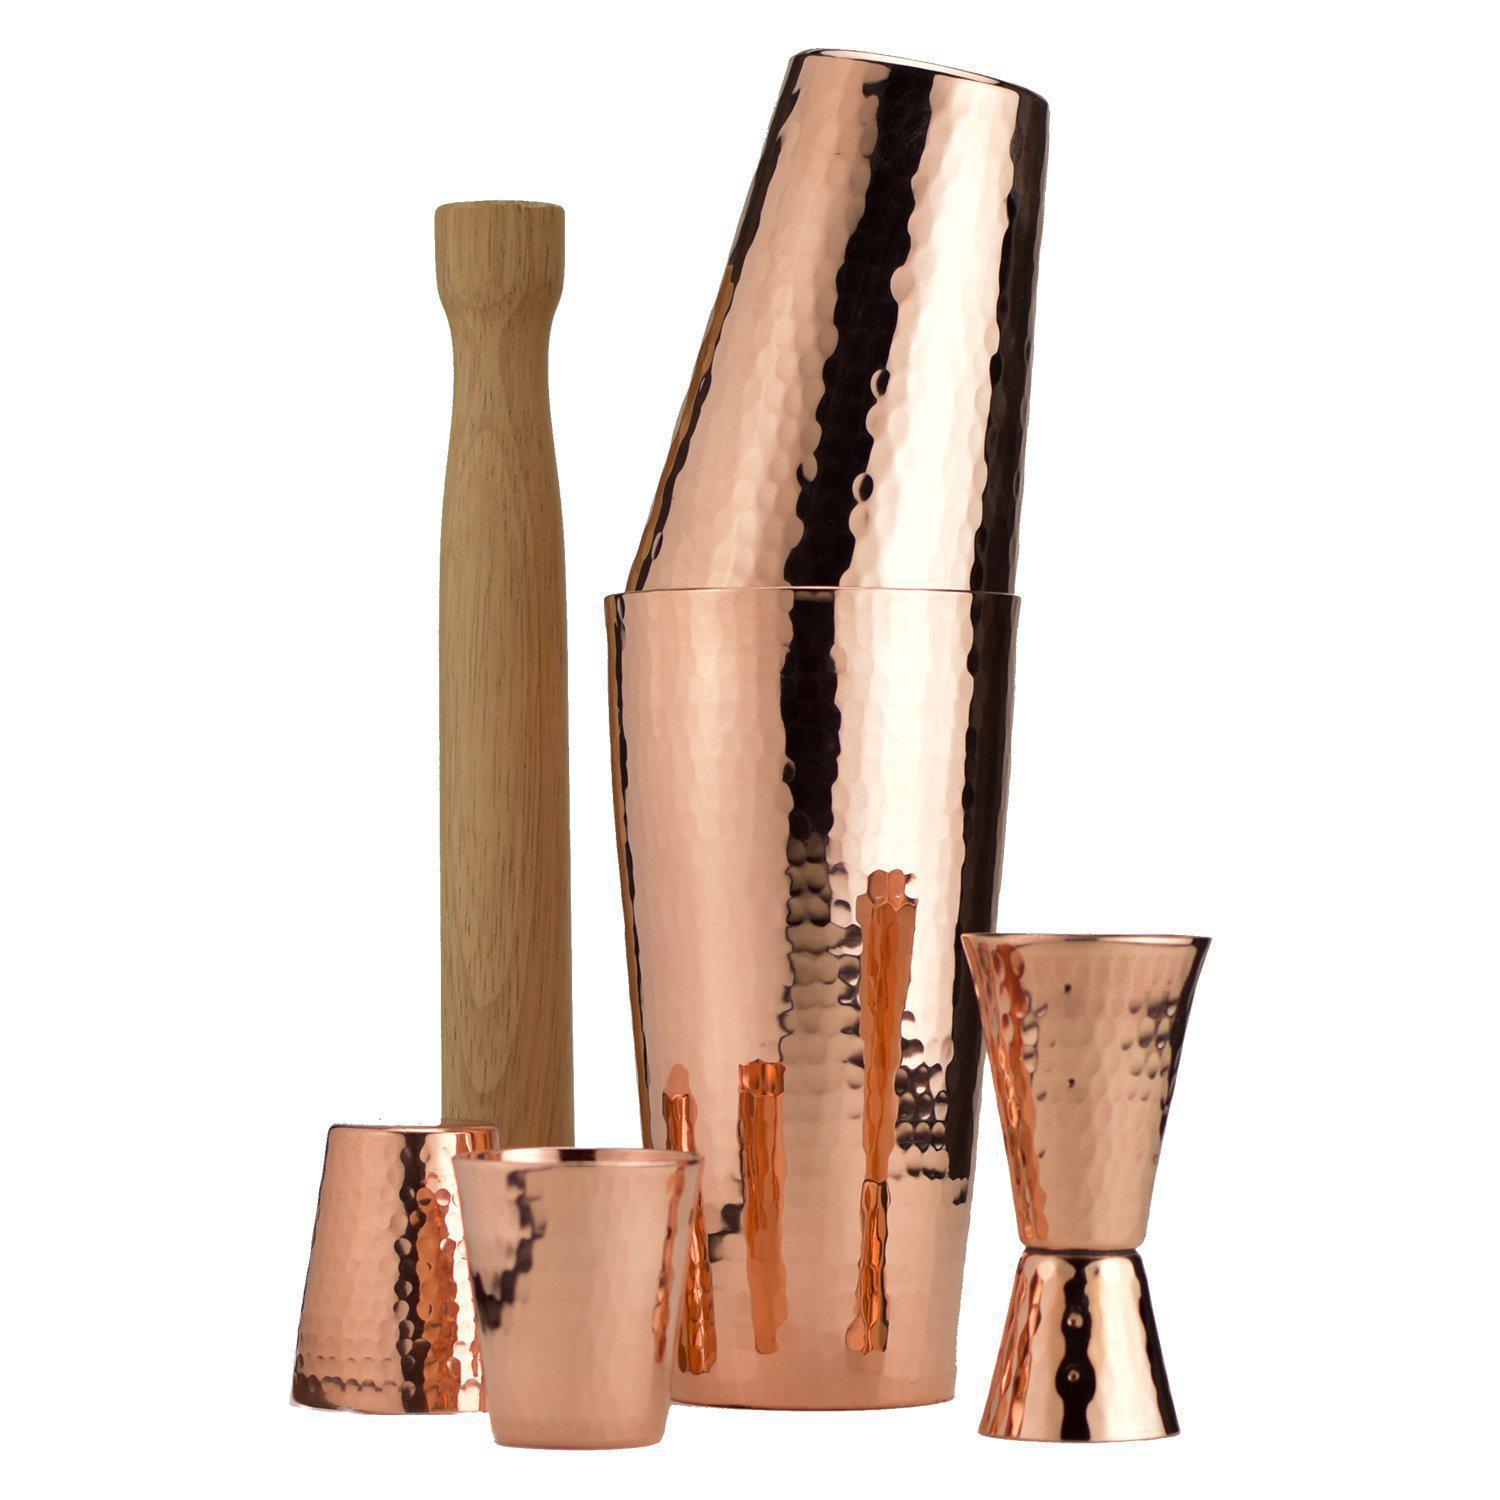 Prince of Scots Premium Hammered Solid Copper Cocktail Shaker Set-Dining and Entertaining-Prince of Scots-634934463176-PremiumShakerSet-Prince of Scots